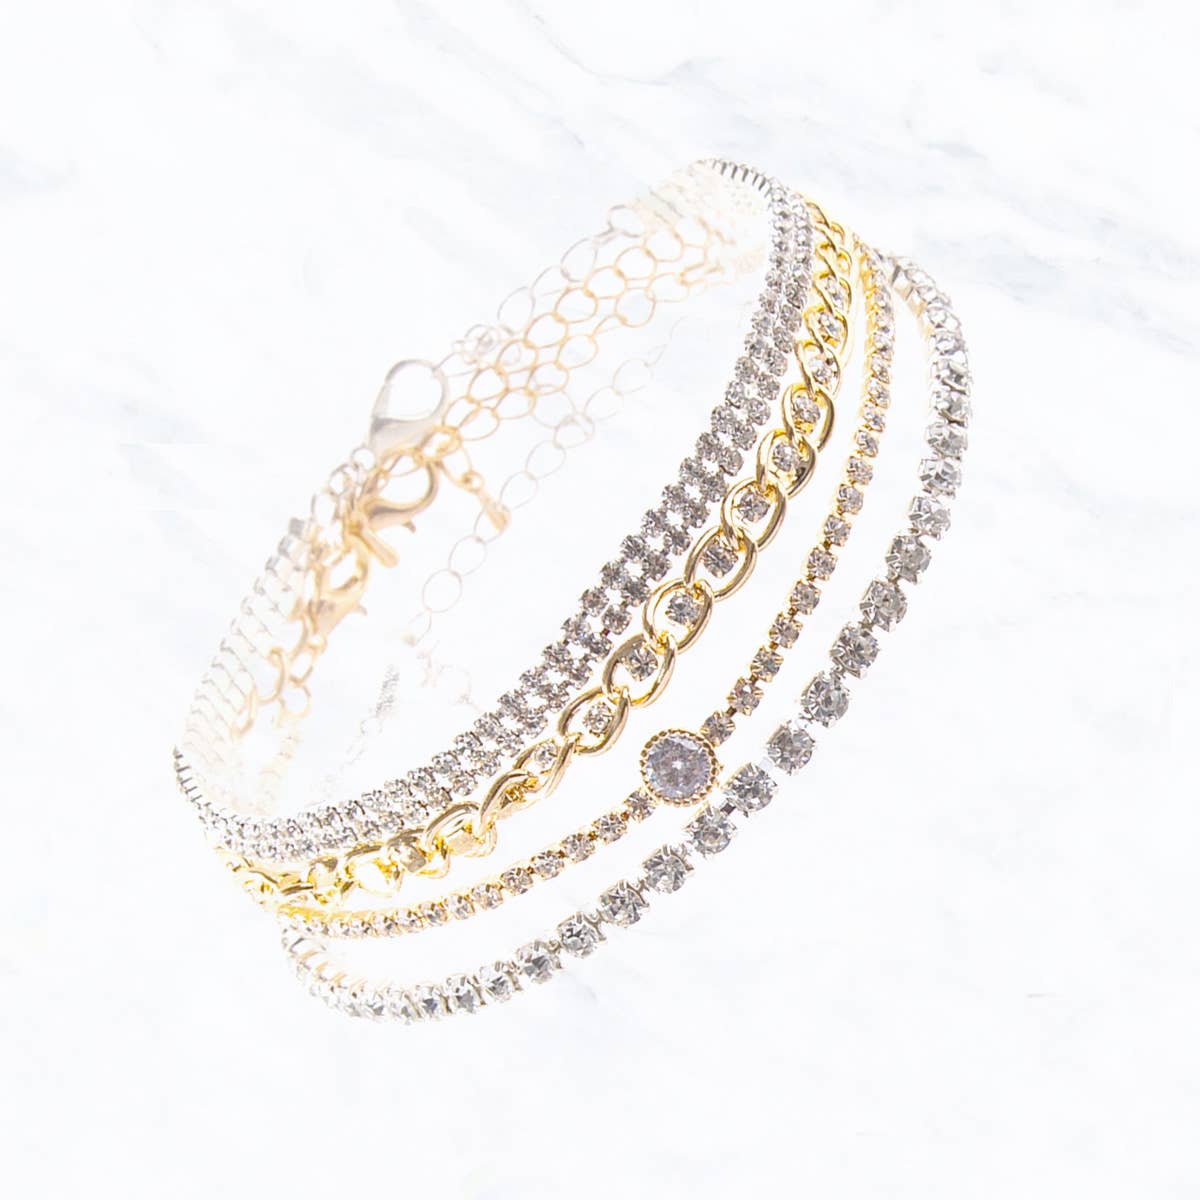 Five Layered Gold Mother of Pearl Chain Bracelets